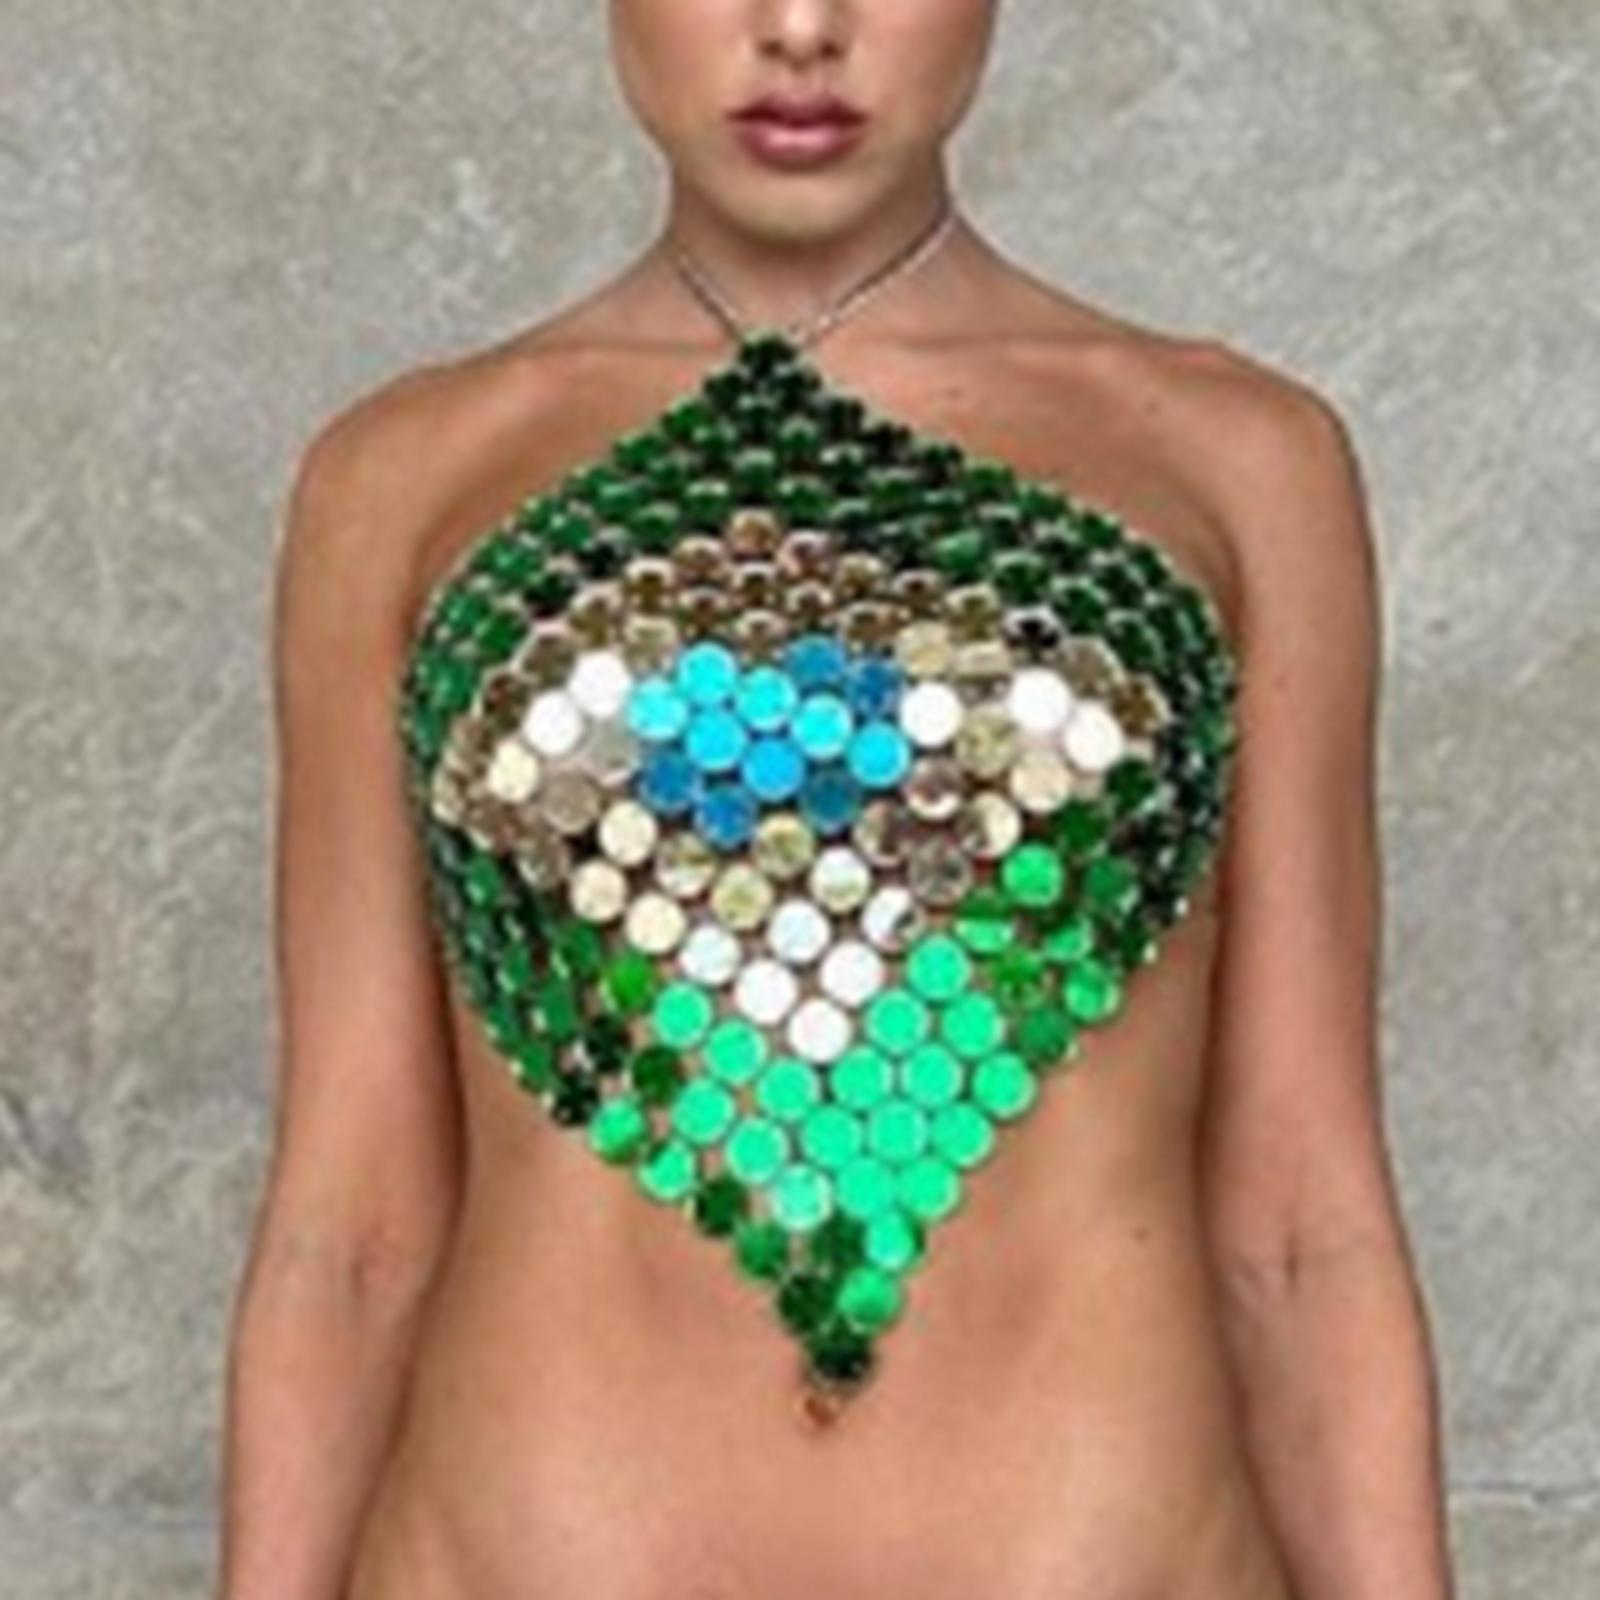 Sequins Crop Top Crop Halter Top Costume Body Jewelry Belly Chain Sleeveless Camisole Cami Top Glitter Bra Tops for Club Rave Festival Party